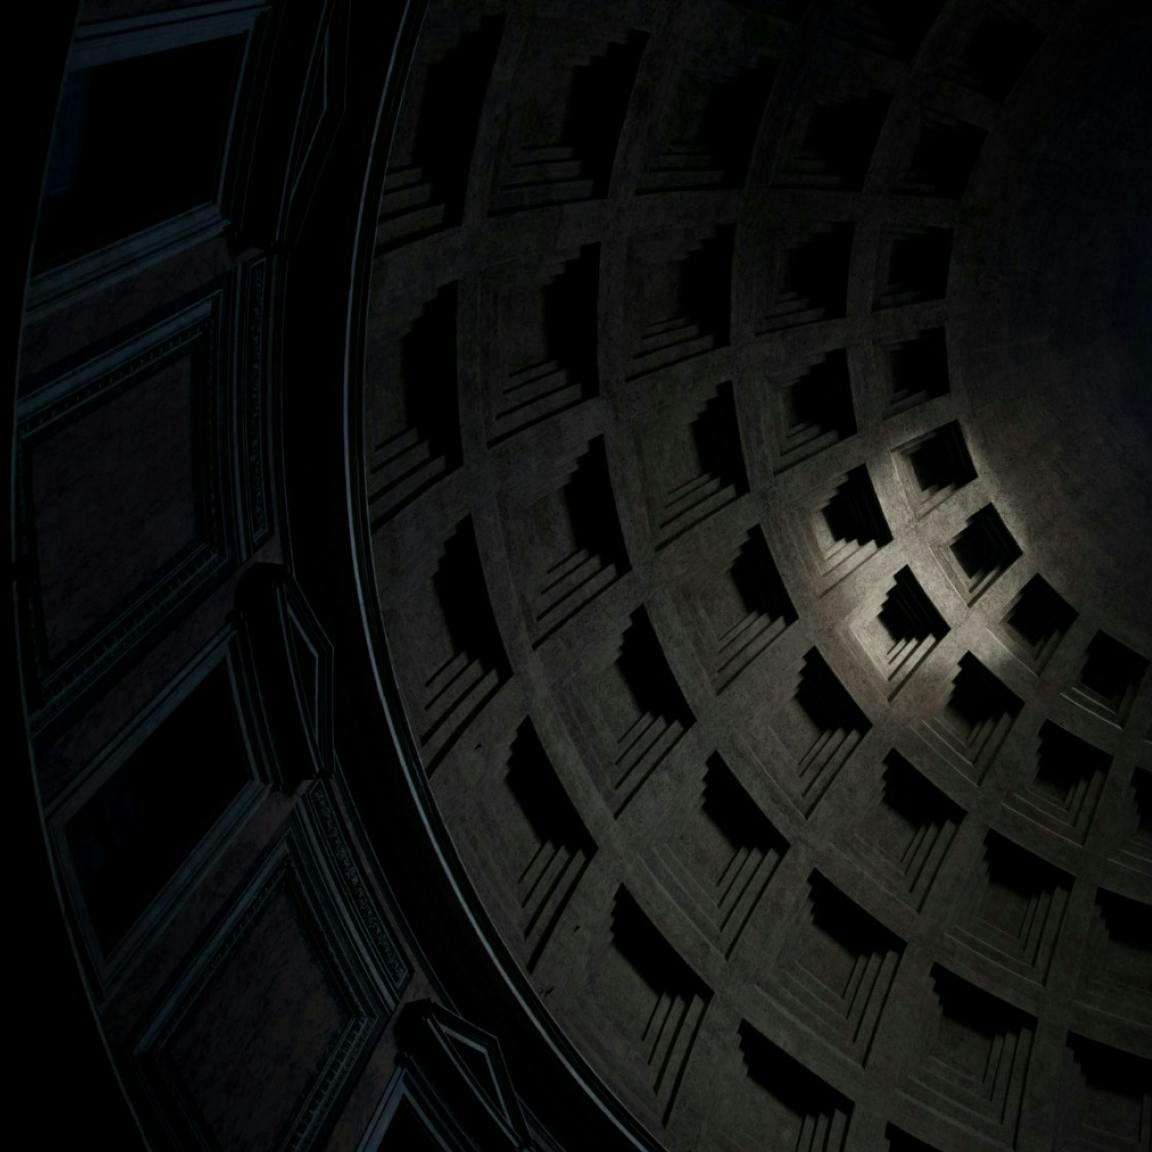 Roman Pantheon, from inside looking at the textured ceiling